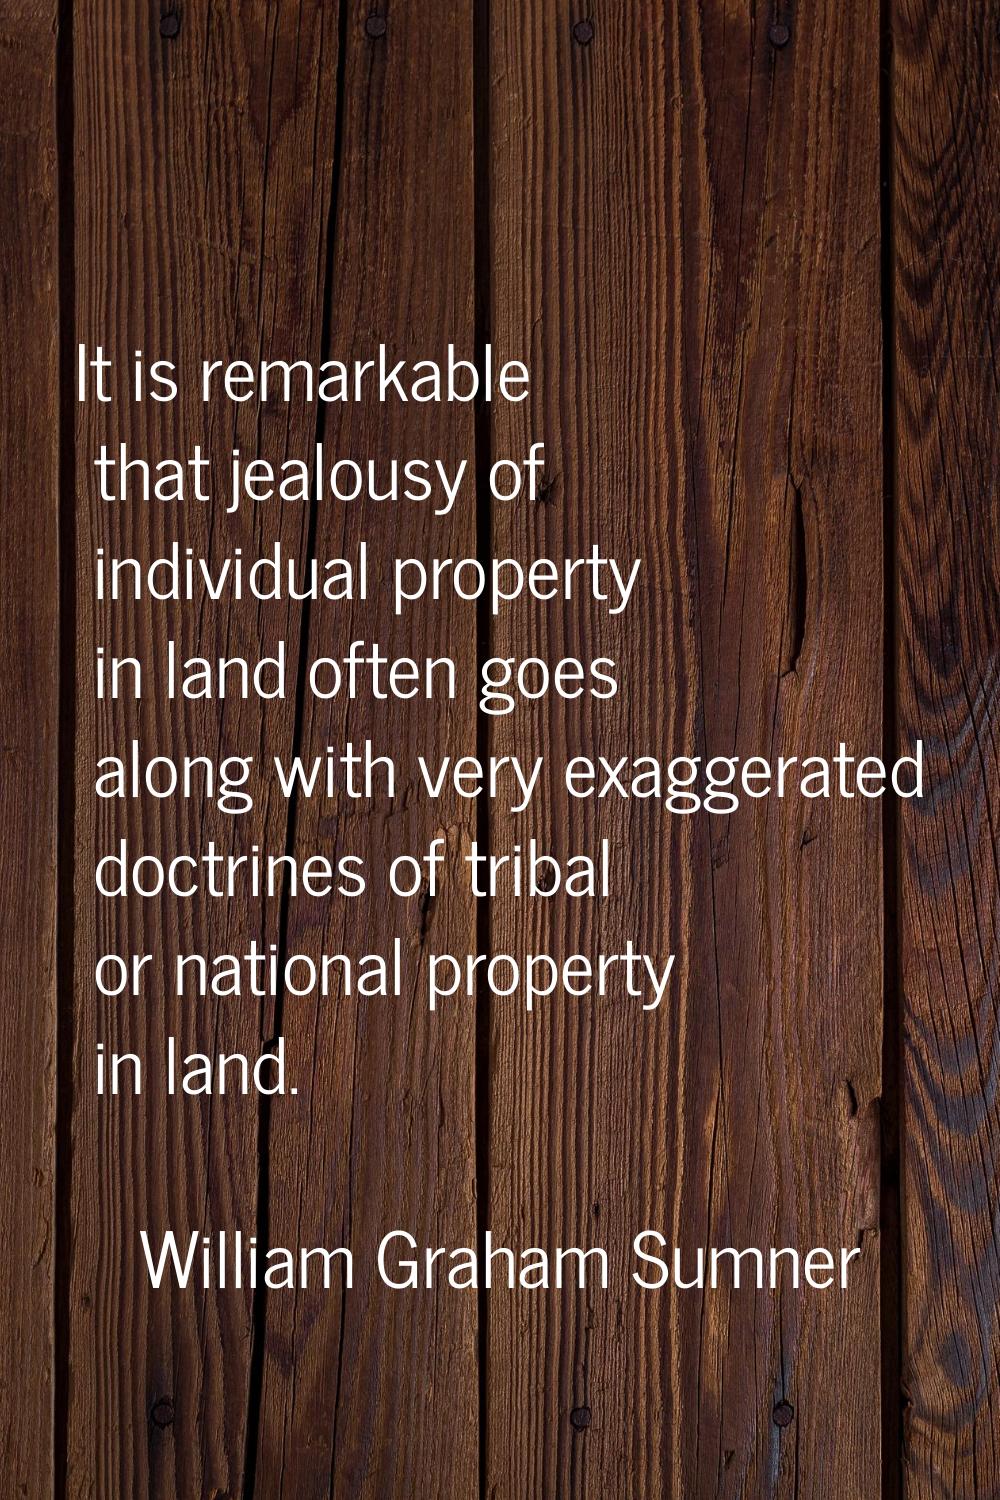 It is remarkable that jealousy of individual property in land often goes along with very exaggerate